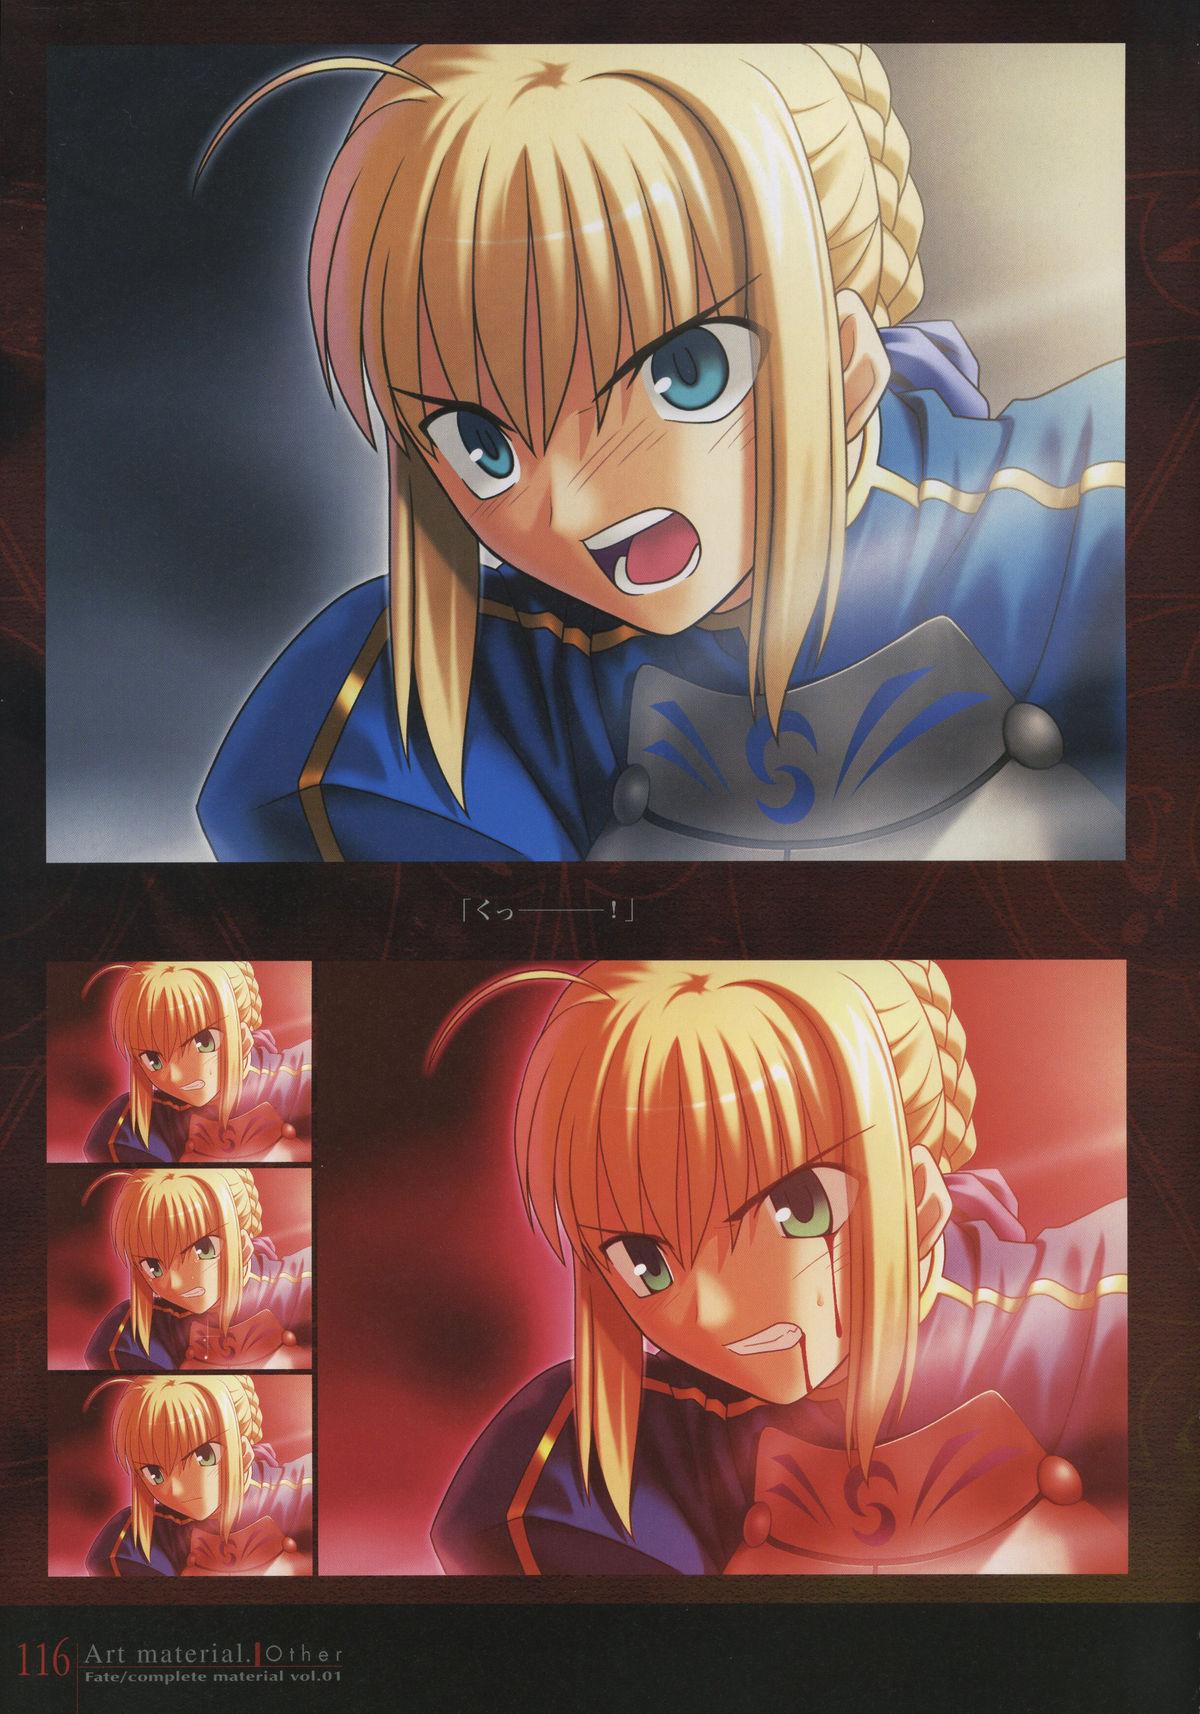 Fate/complete material I - Art material. 120